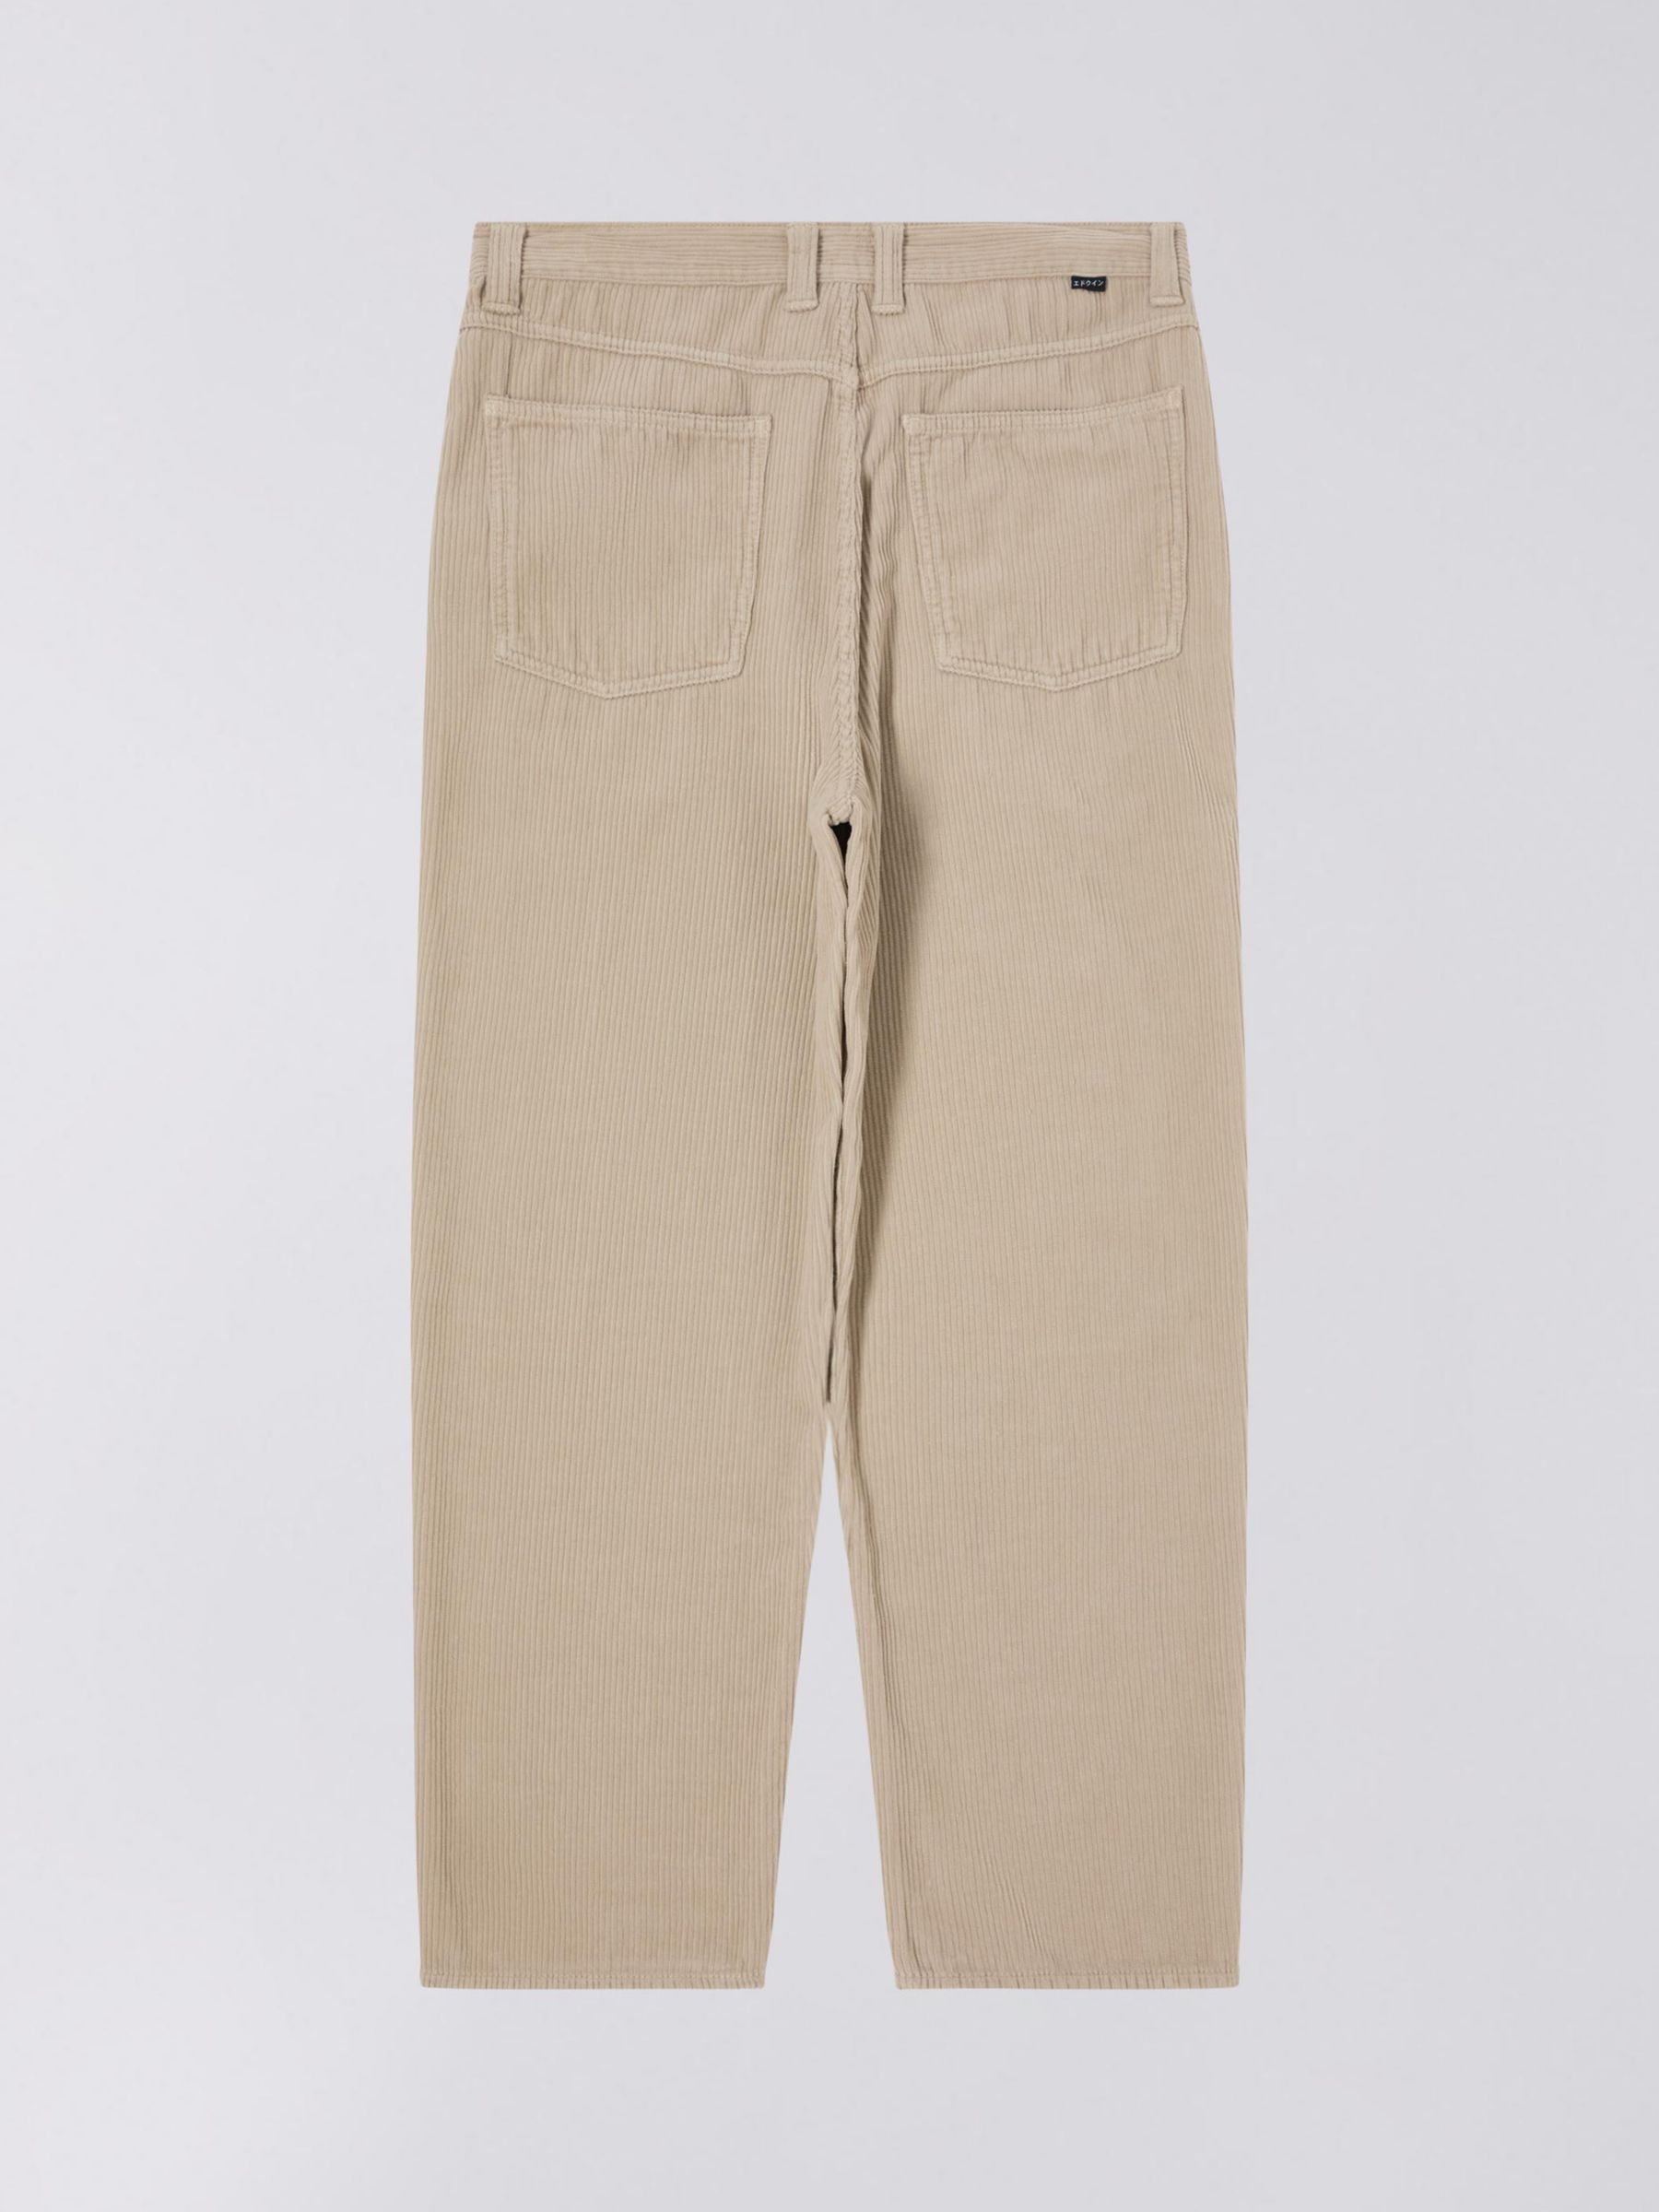 Buy Edwin Sly Relaxed Fit Corduroy Trousers, Peyote Online at johnlewis.com